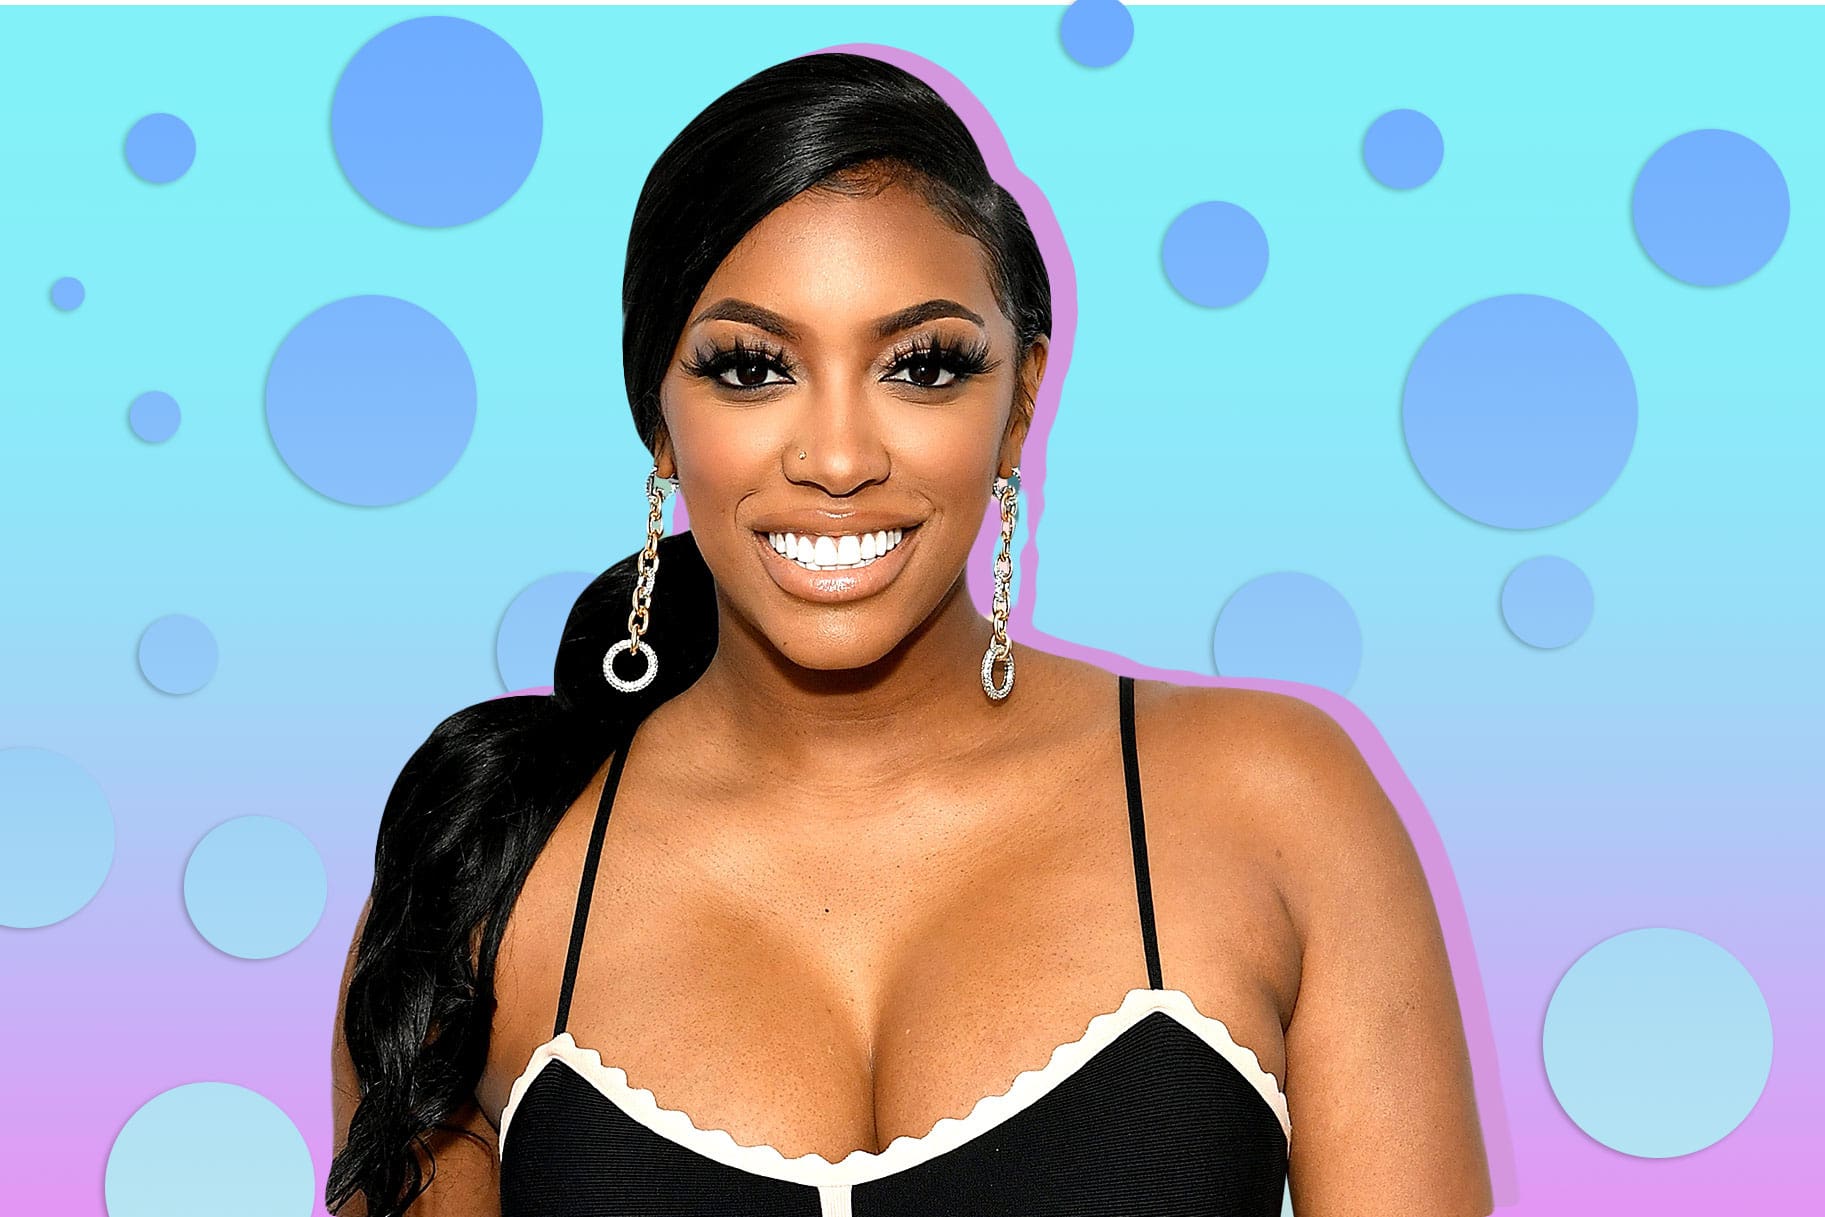 Porsha Williams Will Make Your Day With New Clips And Photos Featuring Baby PJ - Check Them Out